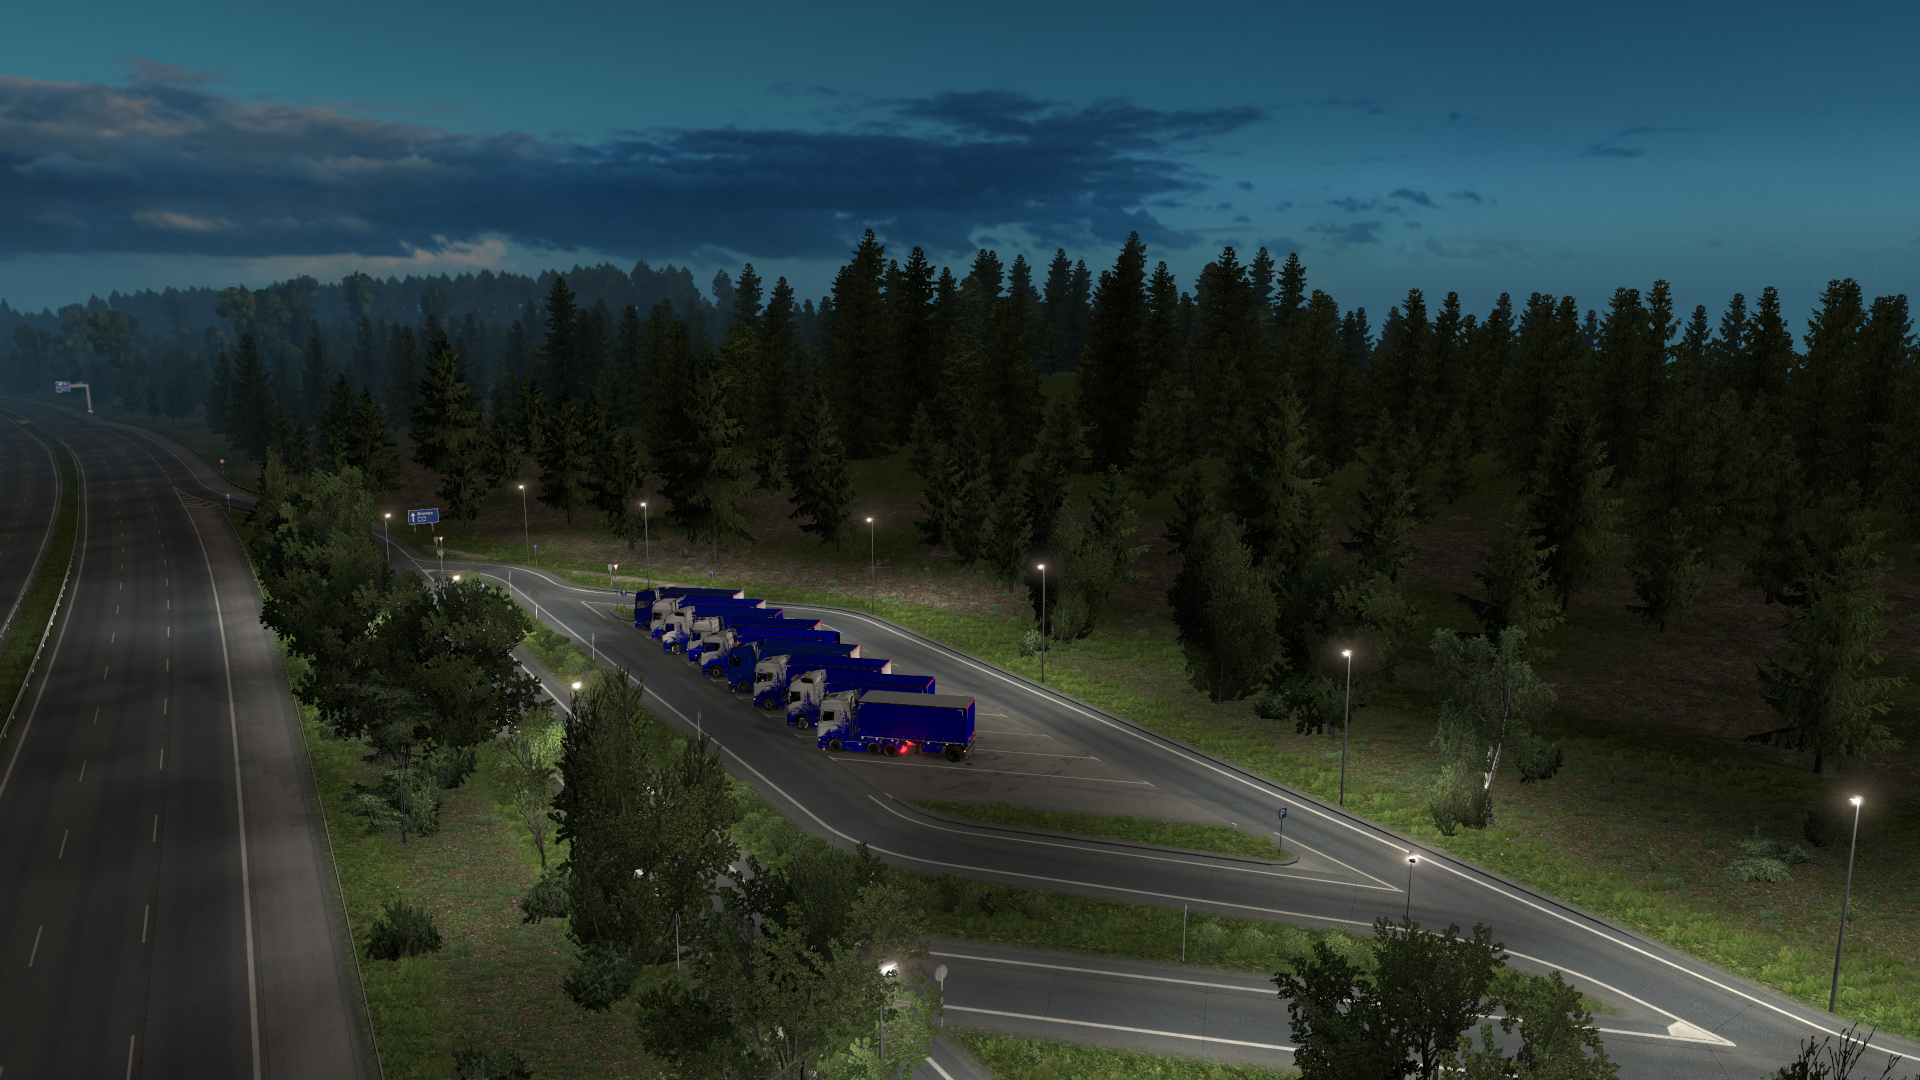 ets2_20200221_224626_00.png